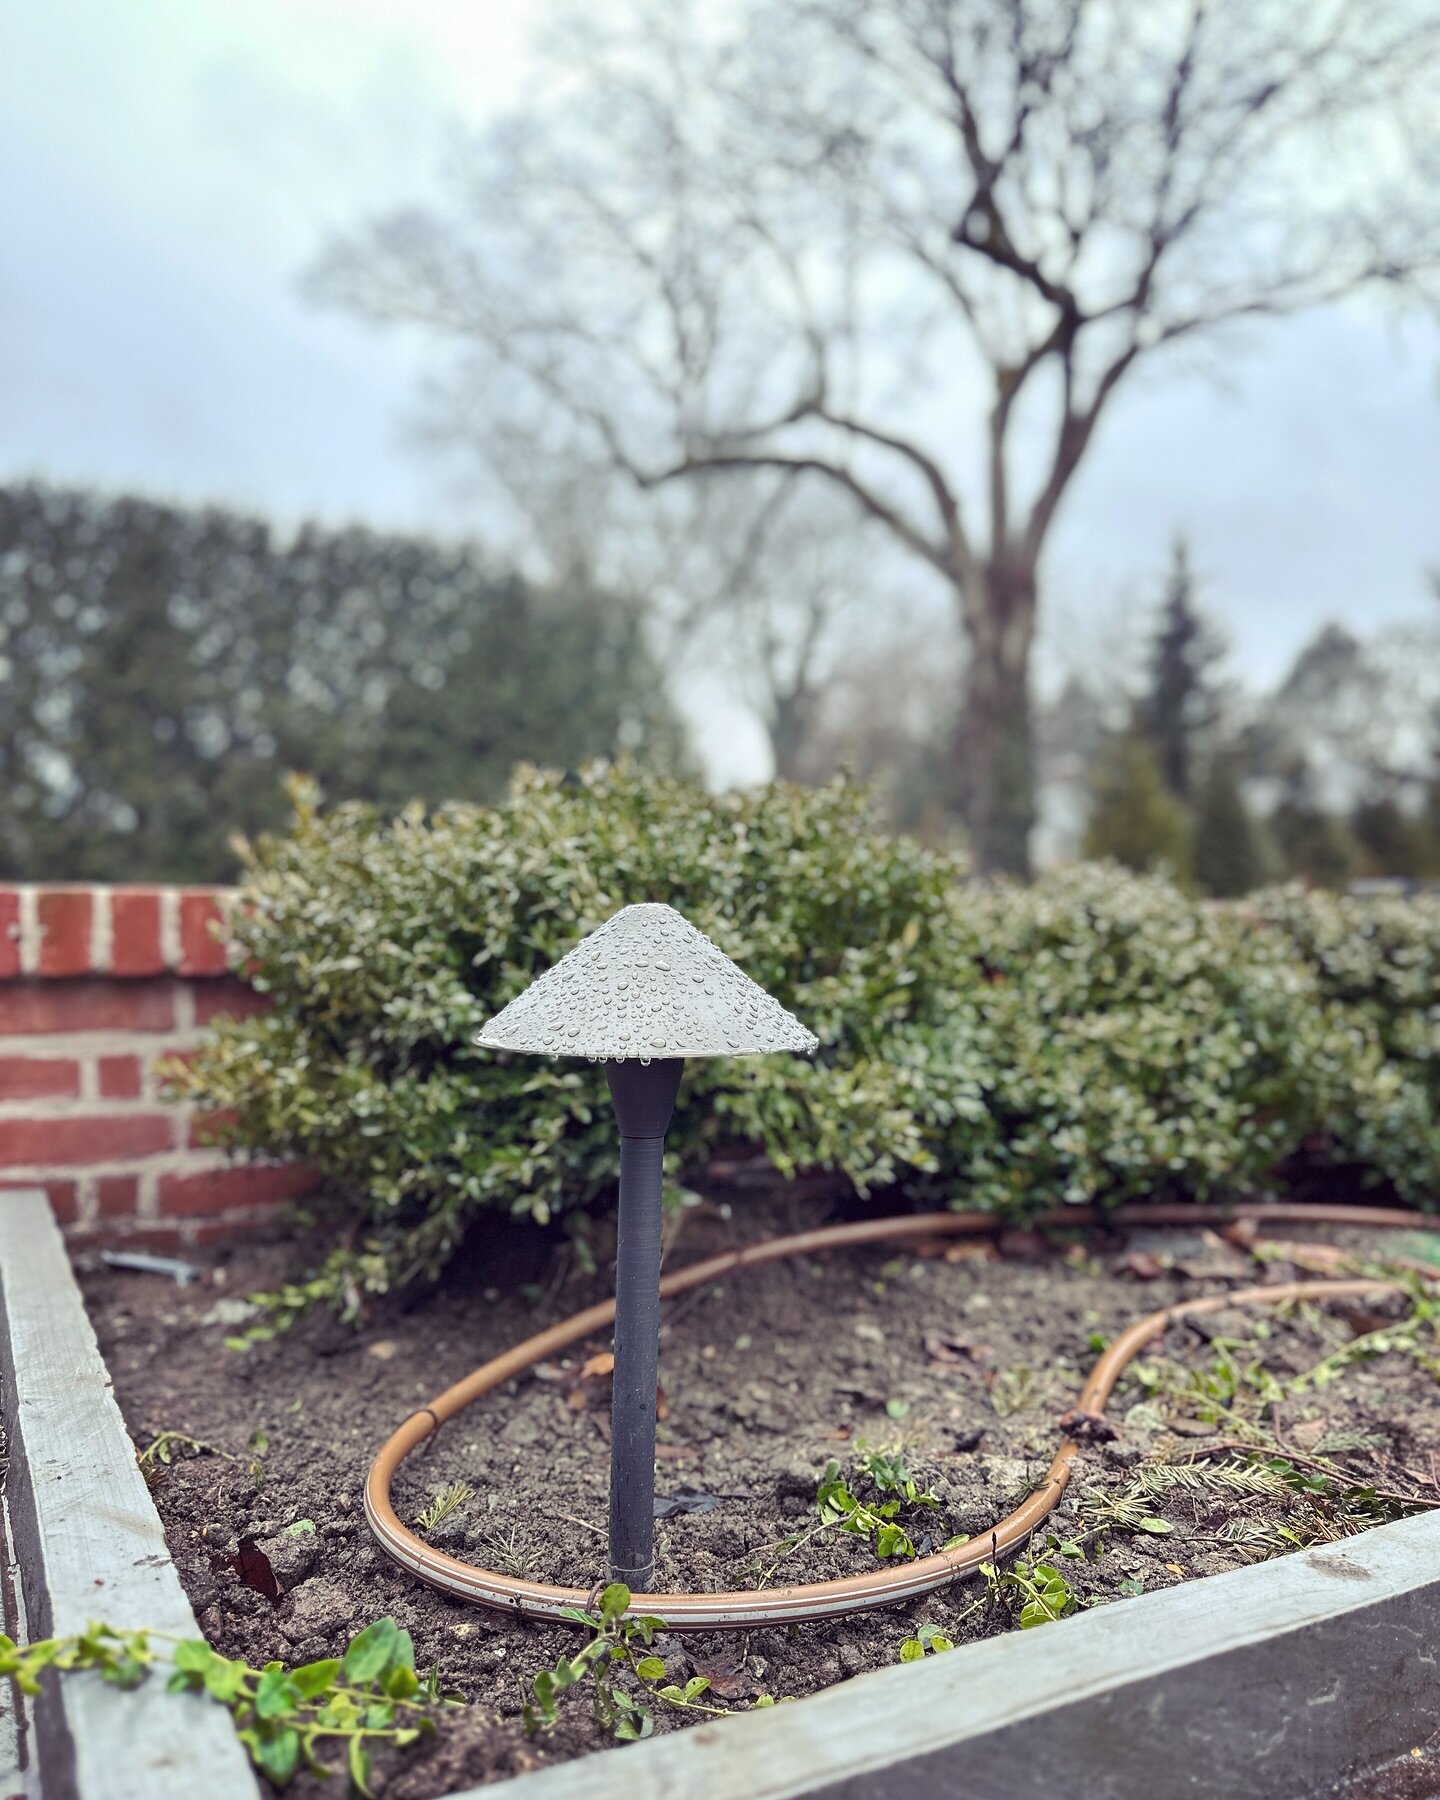 Winter doesn&rsquo;t stop us. Finishing up this lighting and irrigation project. More to come soon. 🤩  #irrigation #irrigationtechnician #irrigationlife #sprinklersystem #lawn #garden #water hunterindustries #siteone #rainbird #lowvolumedrip #dripir